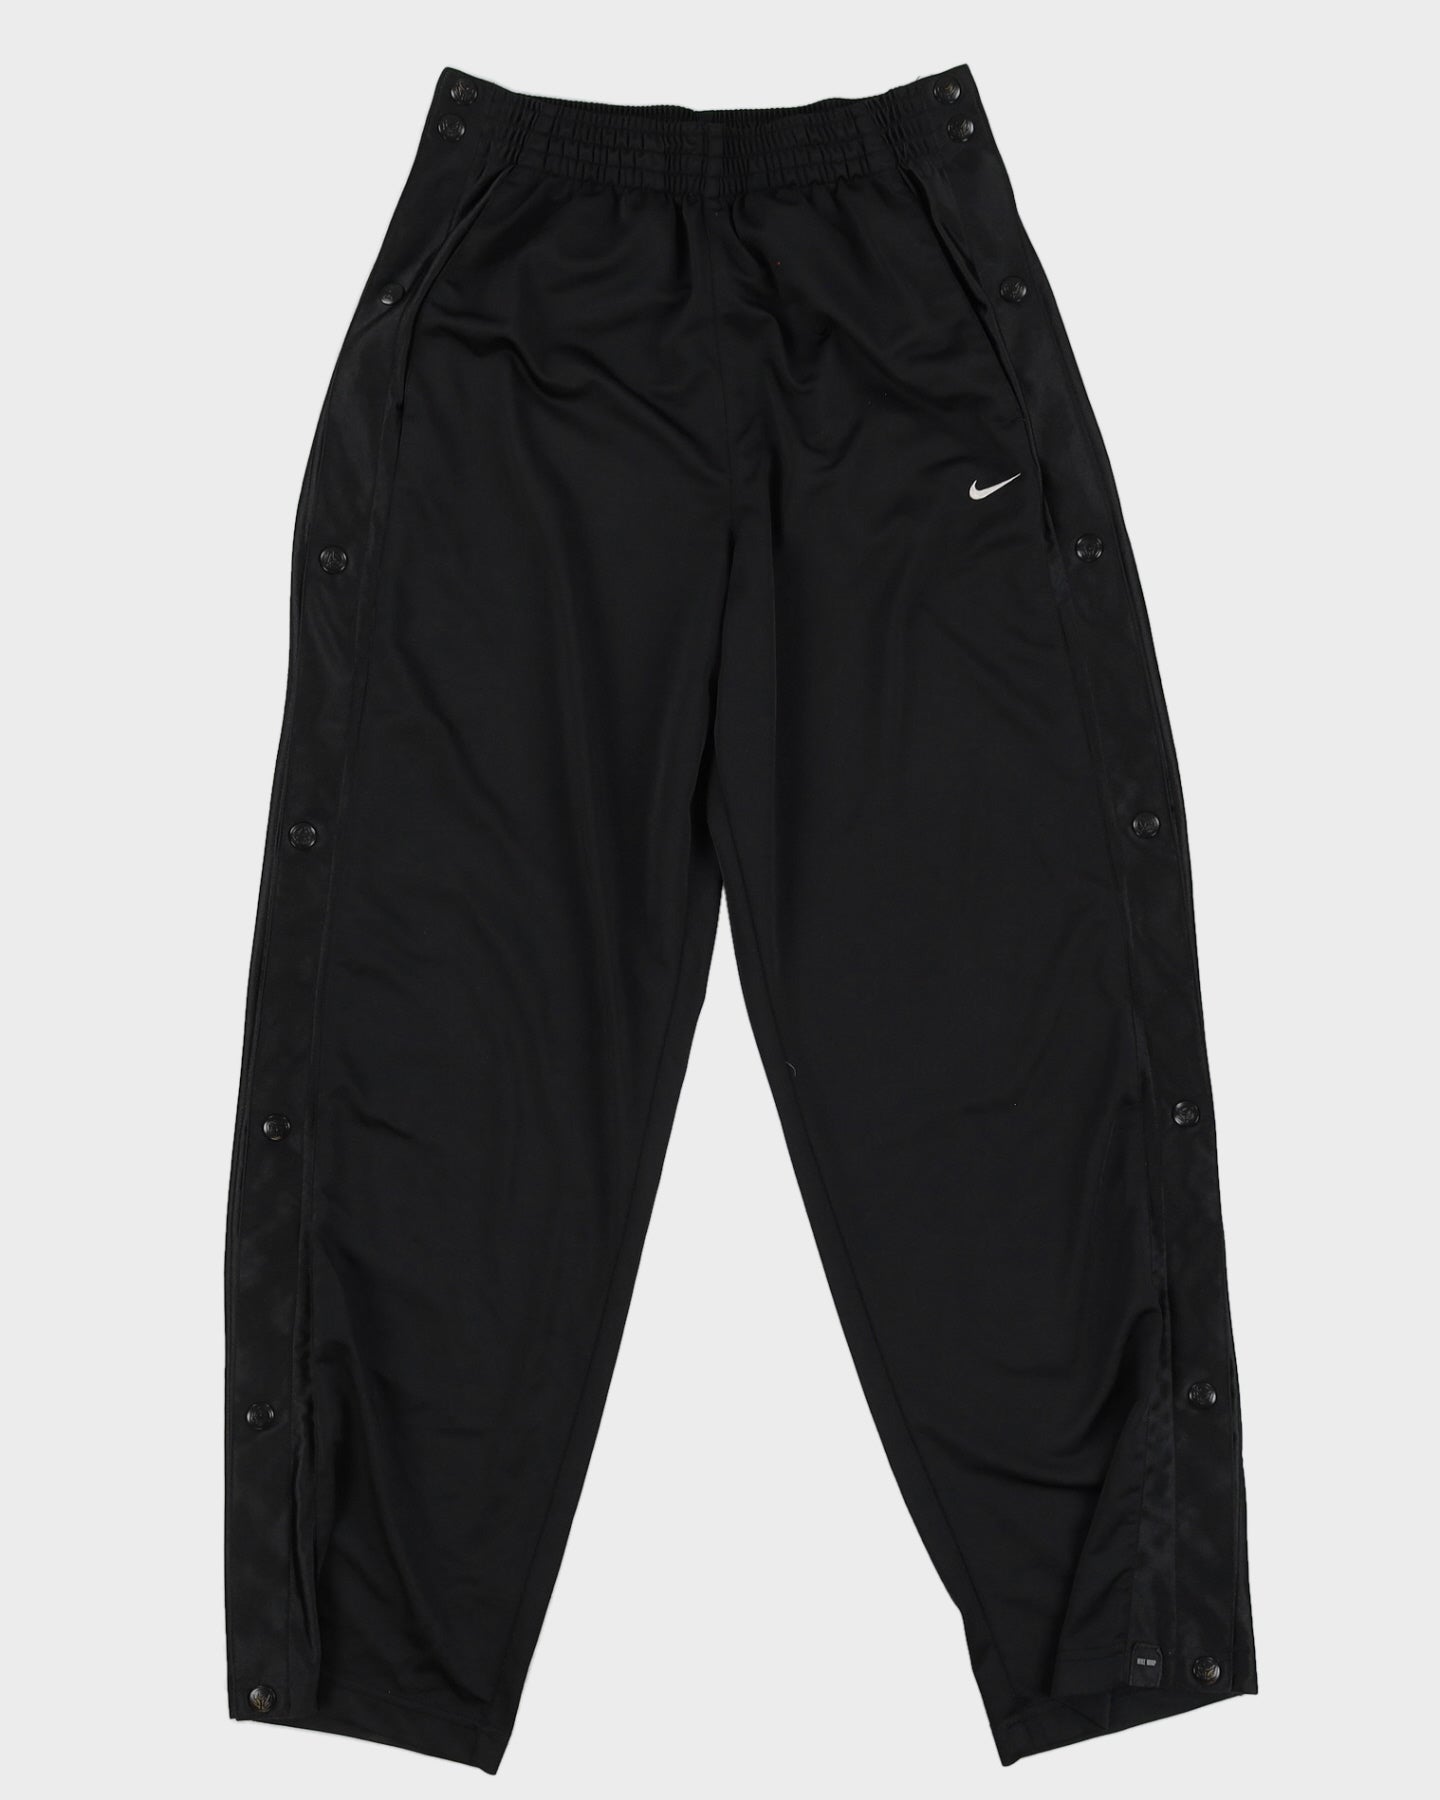 00s Y2K Nike Black Button up Track Bottoms - W32 L33